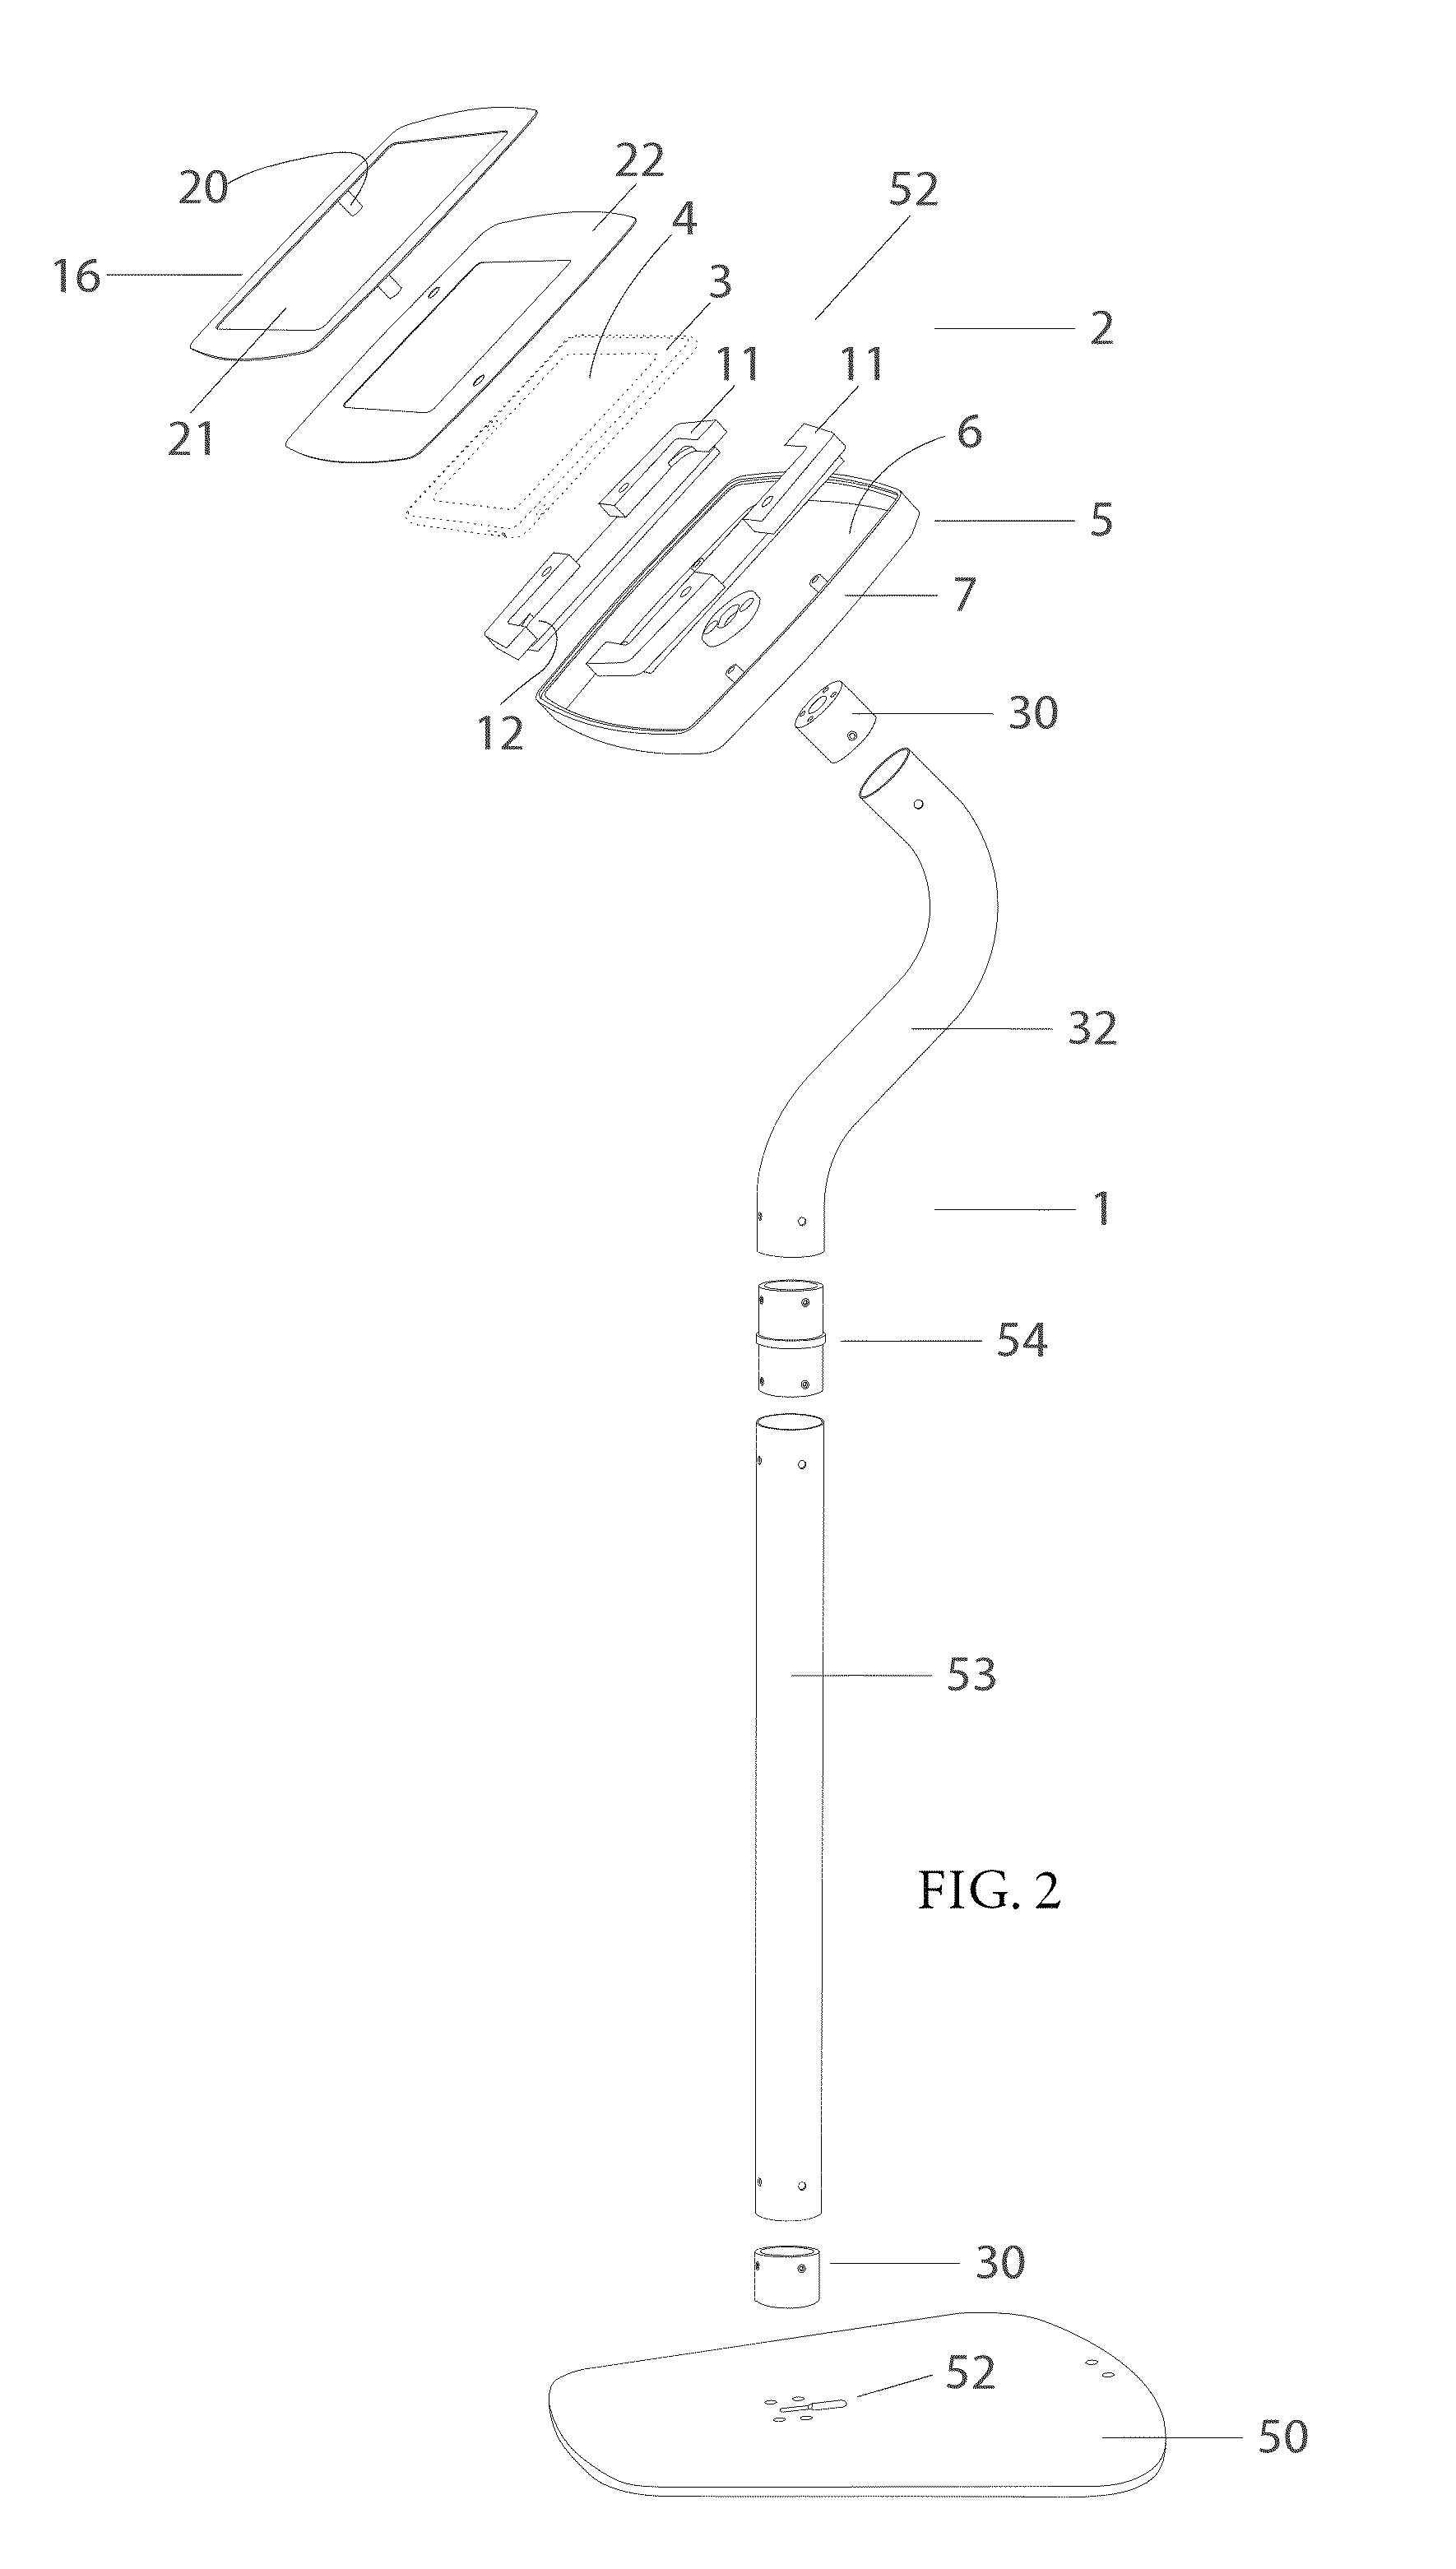 Device holder assembly and display stand assembly for tablet computers or the like